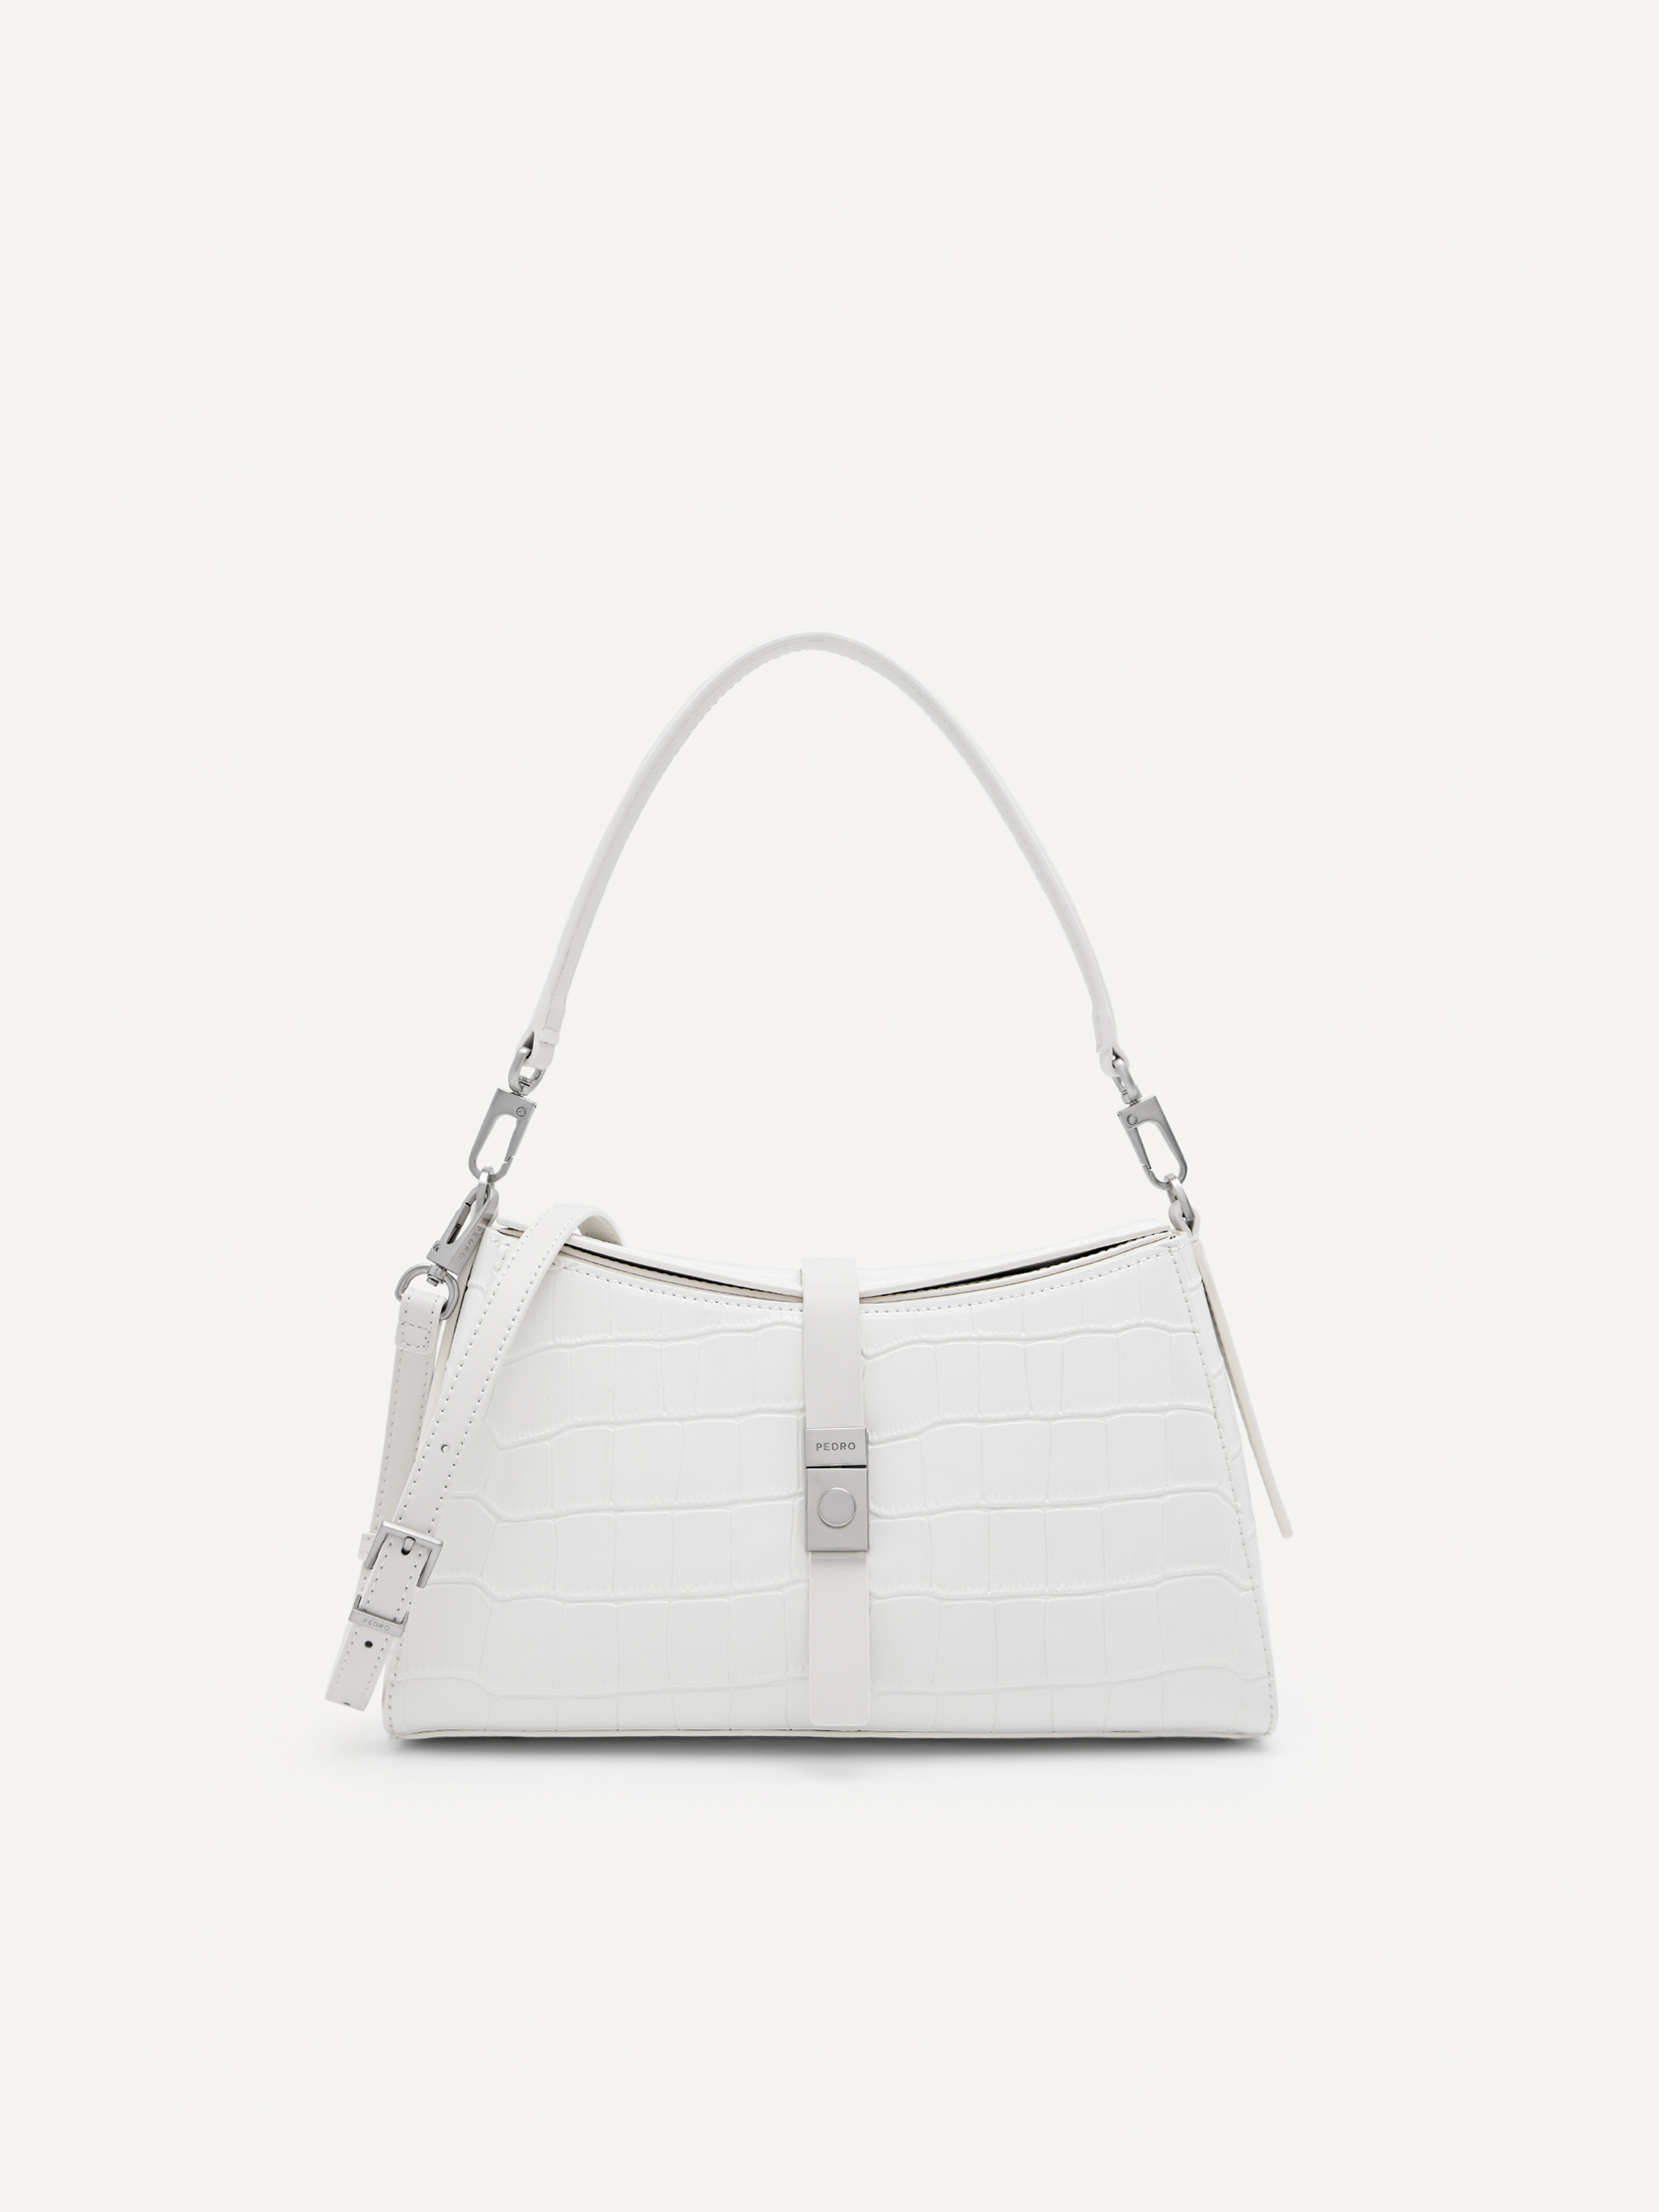 White Leather Top Handle Bag Pedro Us, How To Clean A White Leather Handbag